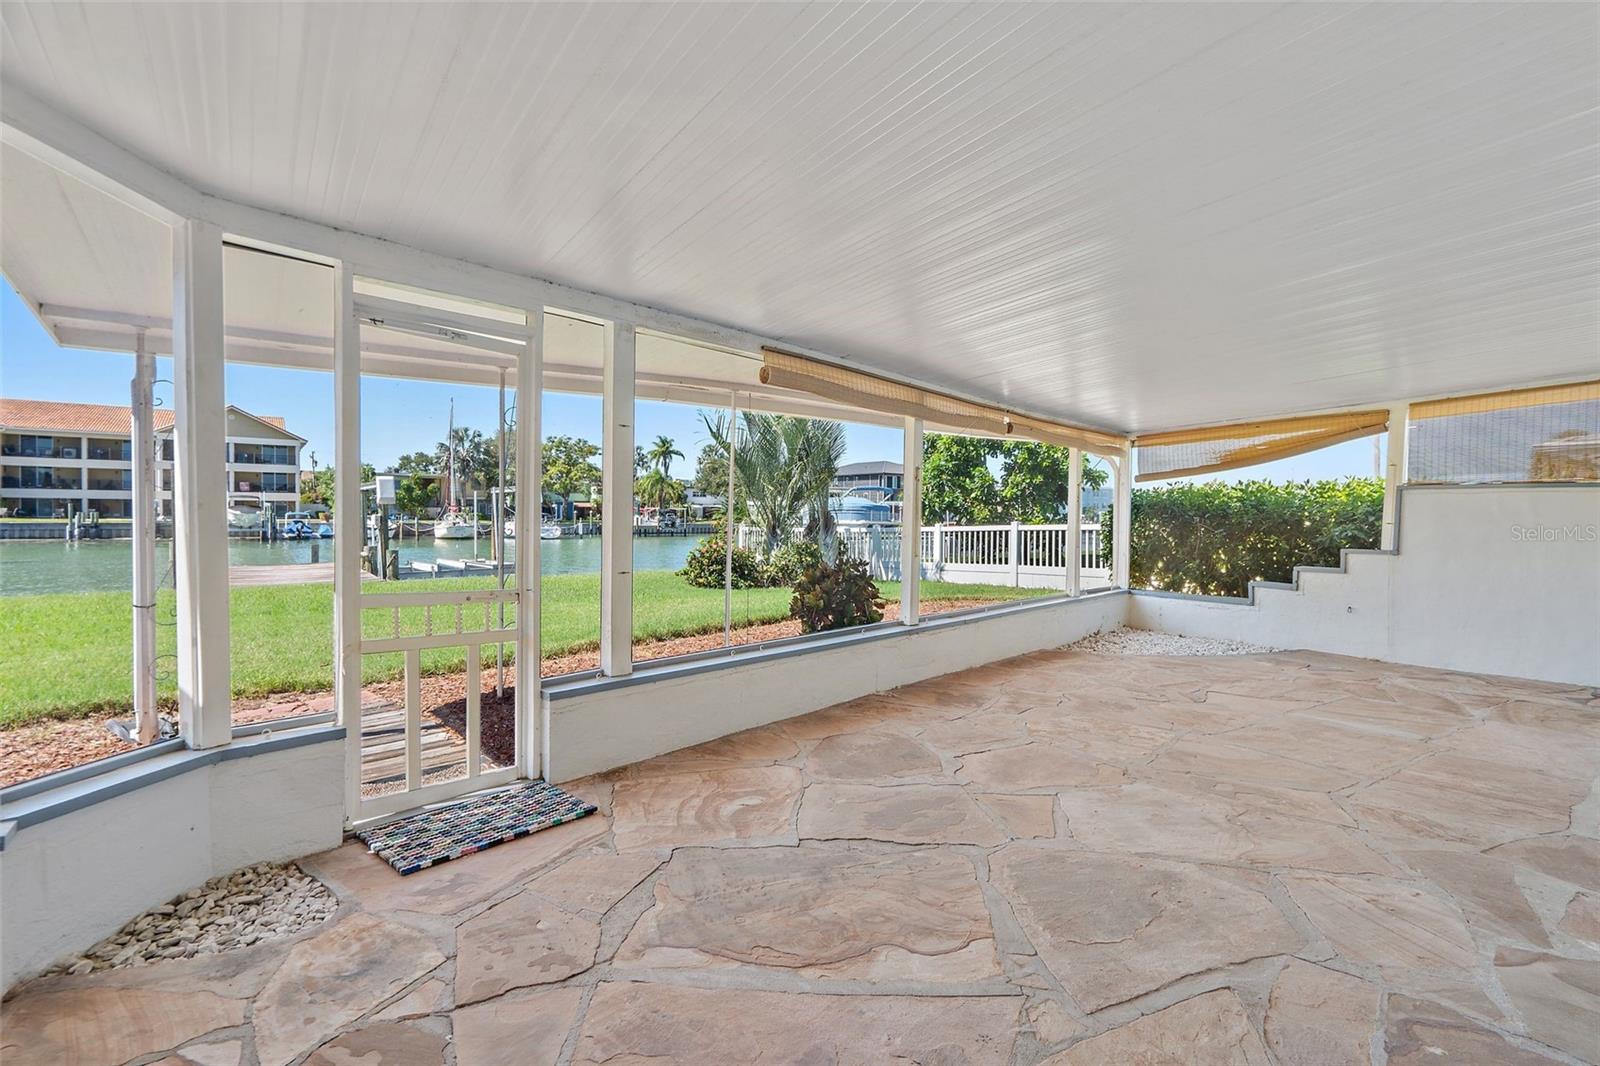 NICE SIZED "Outdoor Living area" from Fla Room / Screened Porch - an extension of inside living space for much of the year - OR a potential expansion area for a new Master Br??